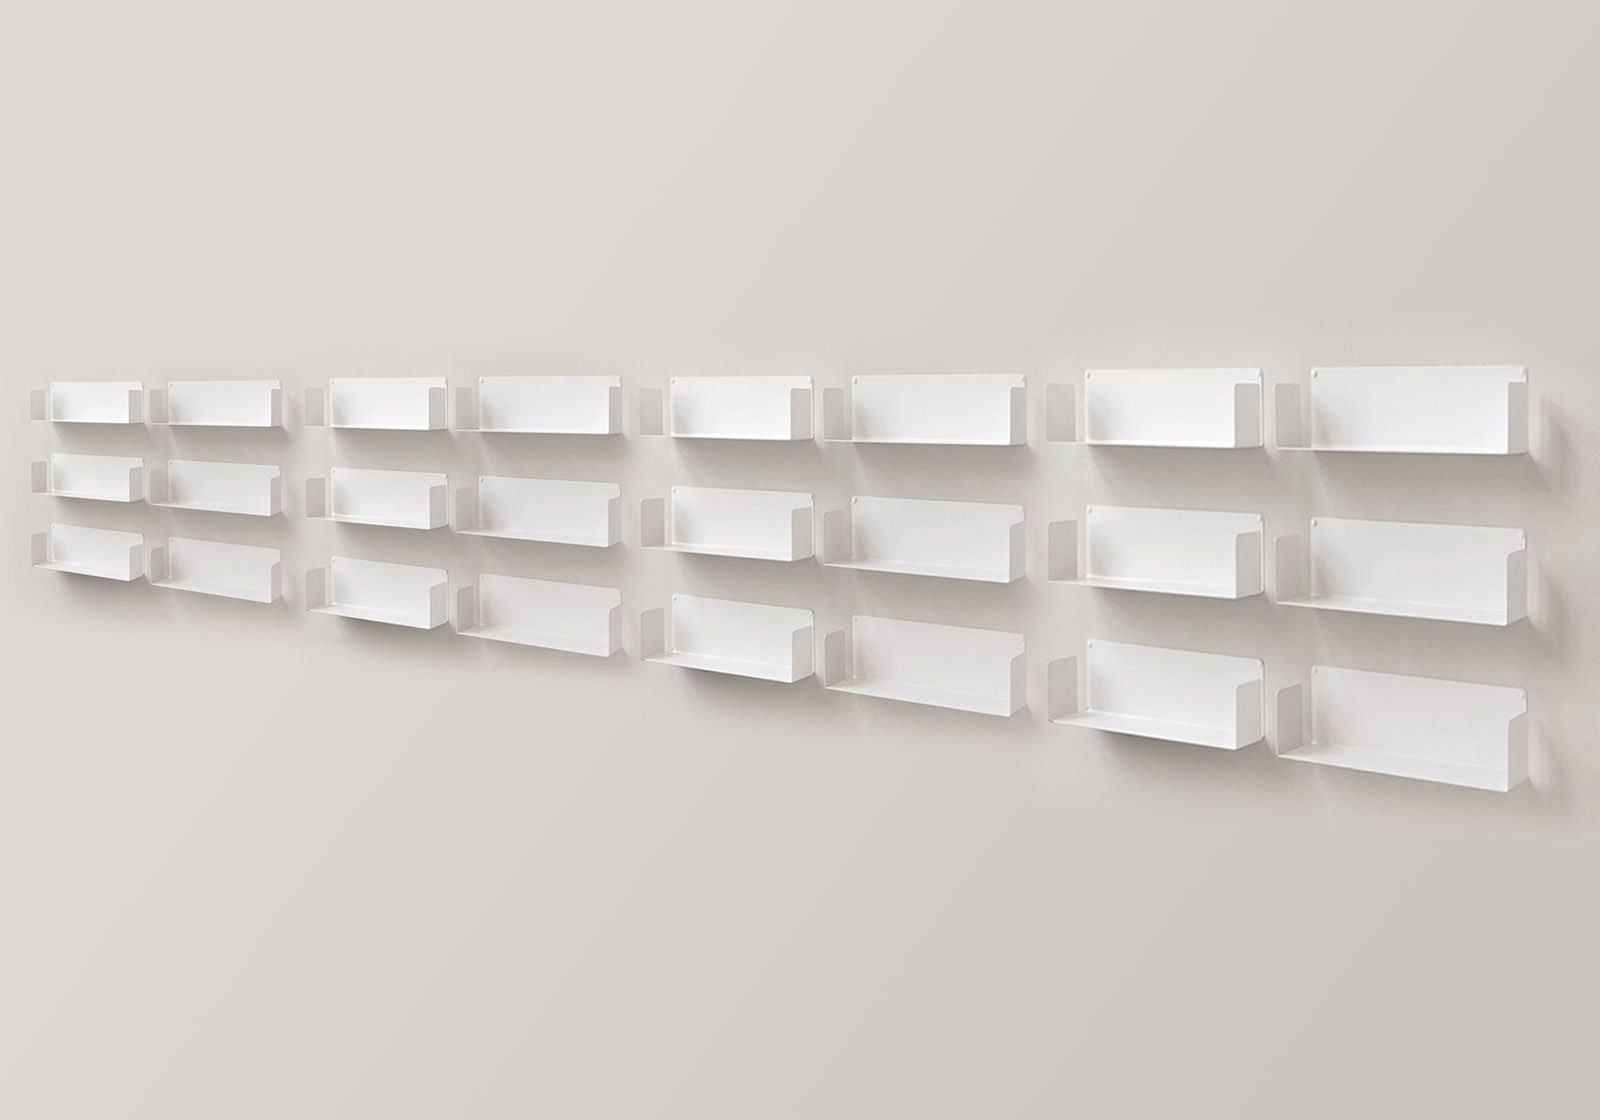 Buy the Floating shelves 23.62 inches long - Set of 24